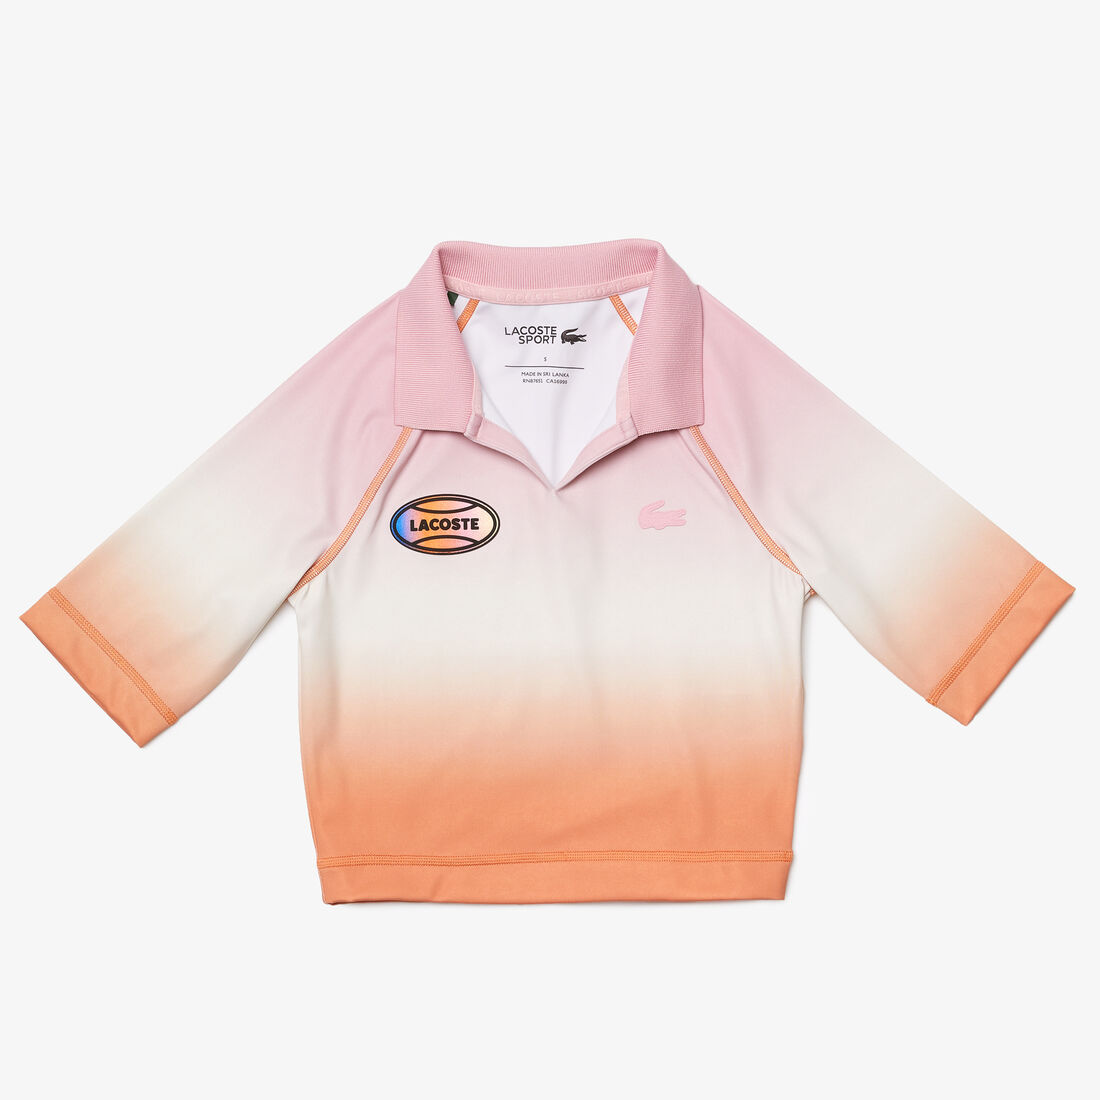 Lacoste Sport Summer Pack Kurzes Gradient And Stretch Polo Shirts Damen Mehrfarbig | TADL-90312